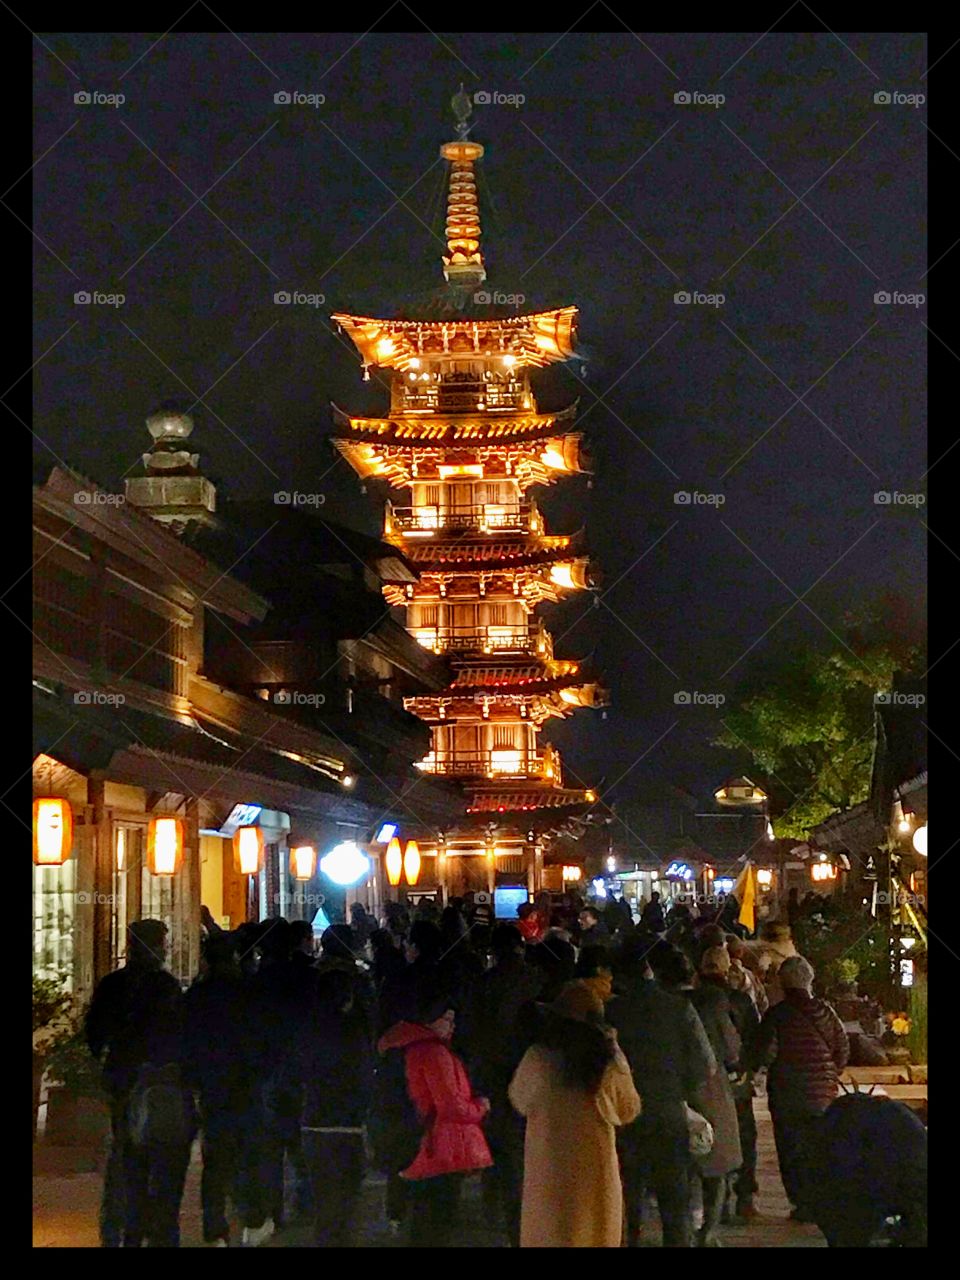 A night glimpse of a pagoda in the city of Wuxi, china - the crowd going for a performance